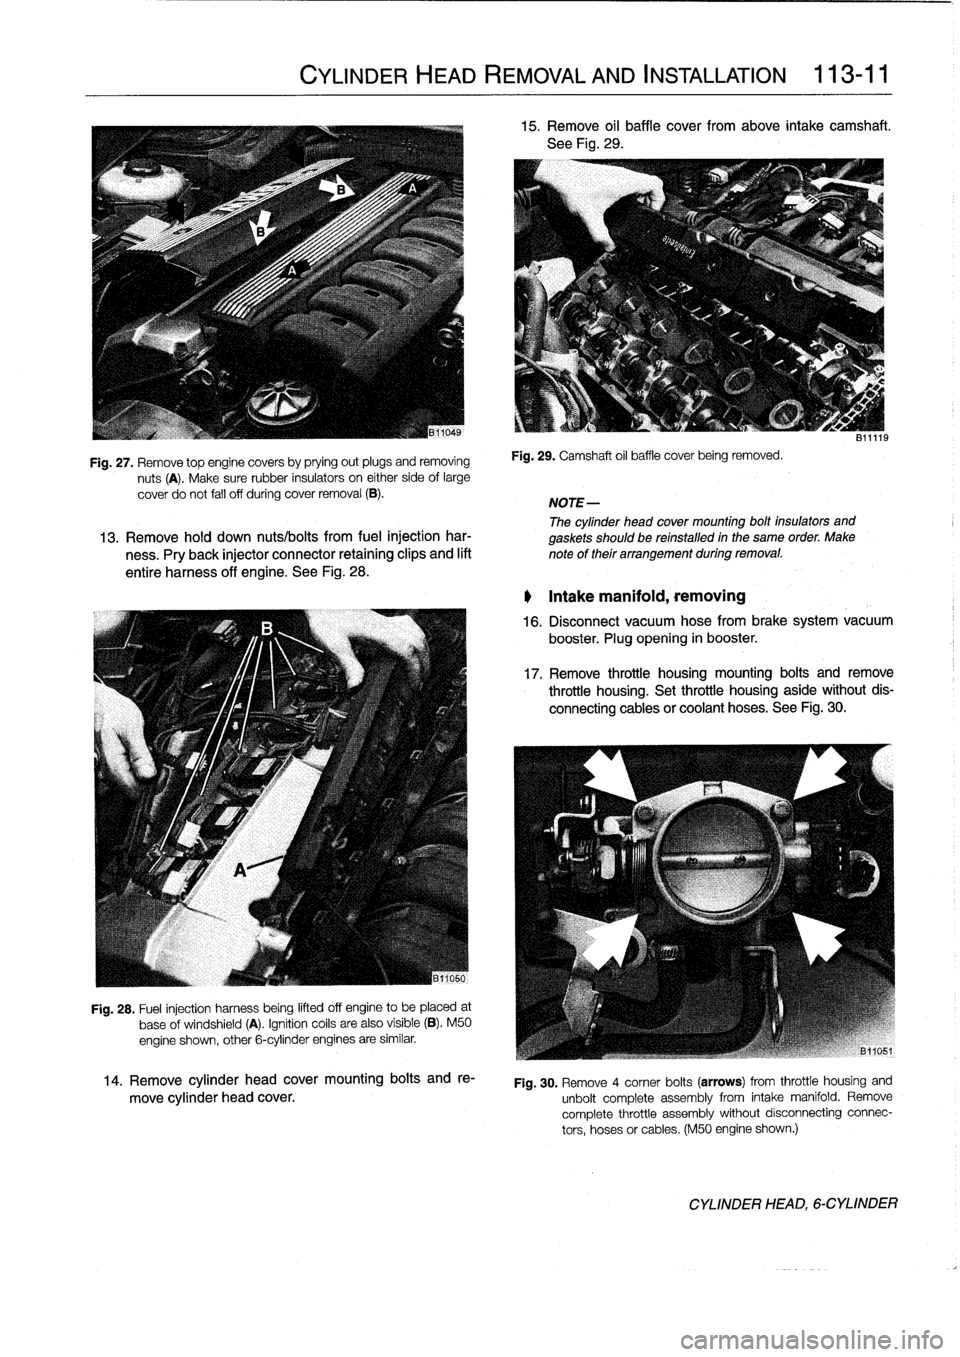 BMW 318i 1997 E36 Owners Guide 
Fig
.
27
.
Remove
top
enginecovers
by
prying
out
plugs
and
removing

nuts
(A)
.
Make
sure
rubber
insulators
on
either
side
of
large

cover
do
not
fall
off
during
cover
removal
(B)
.

Fig
.
28
.
Fuel
